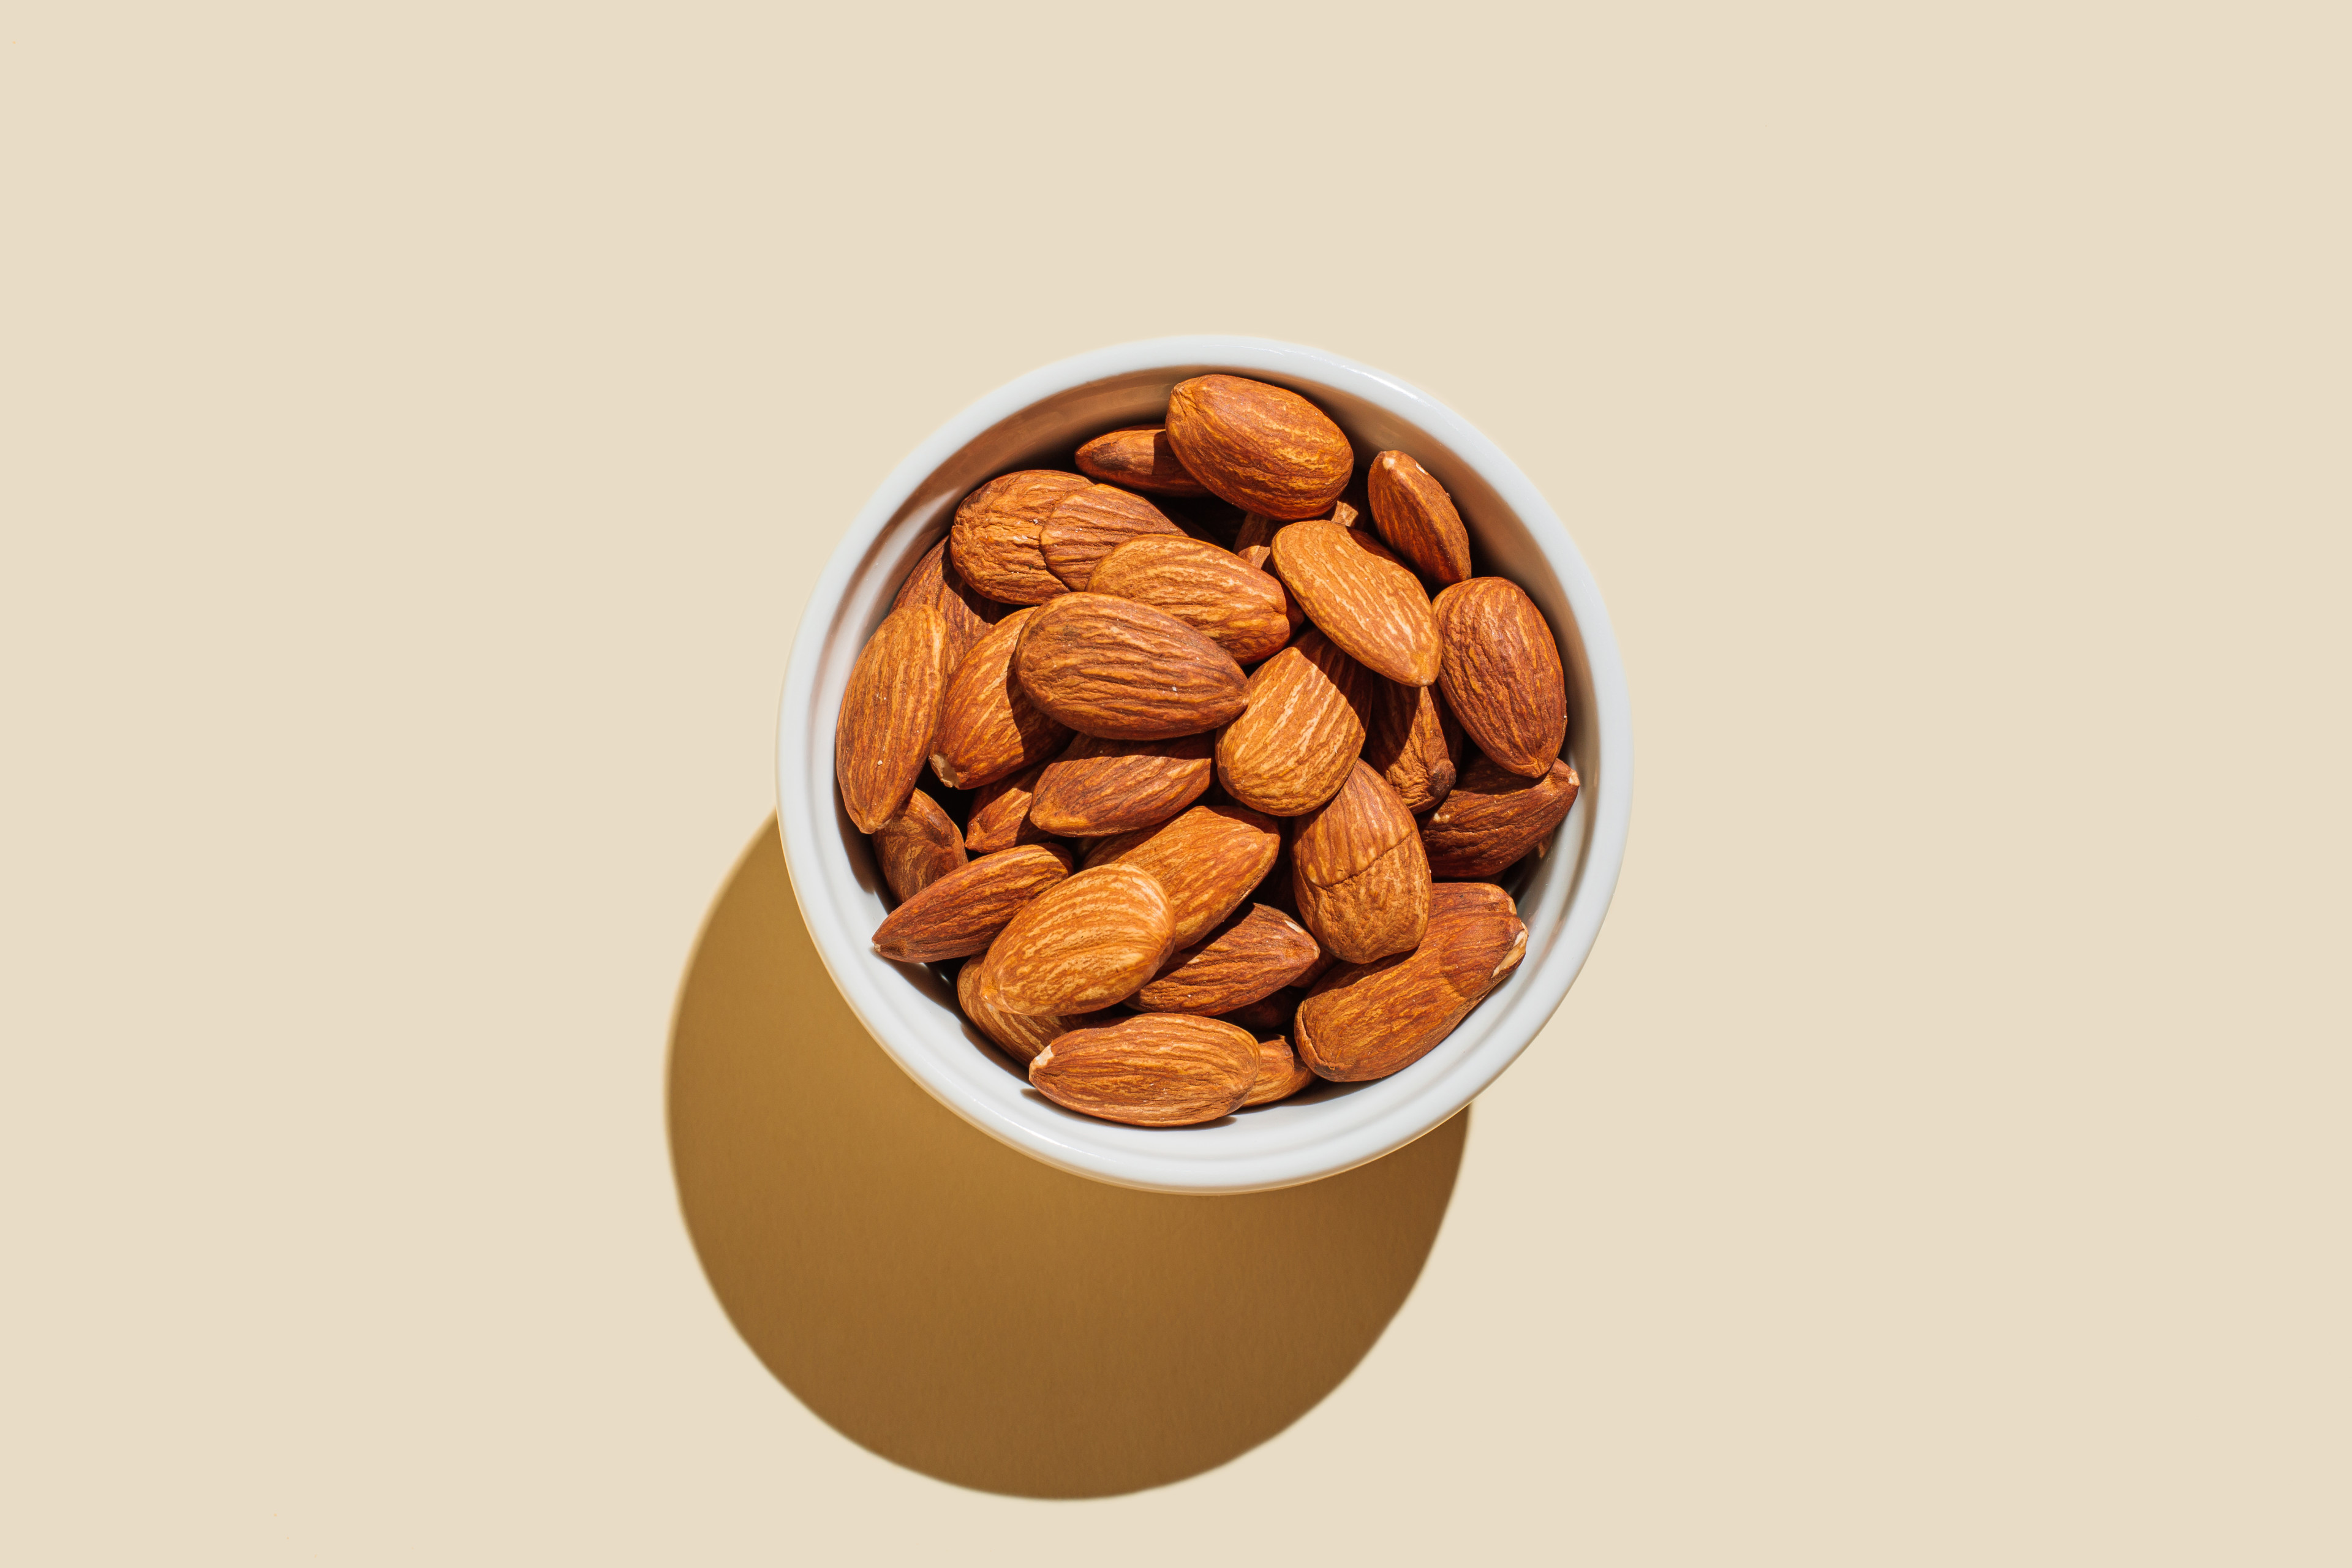 High-Fiber Foods: A bowl of almonds against a neutral background.